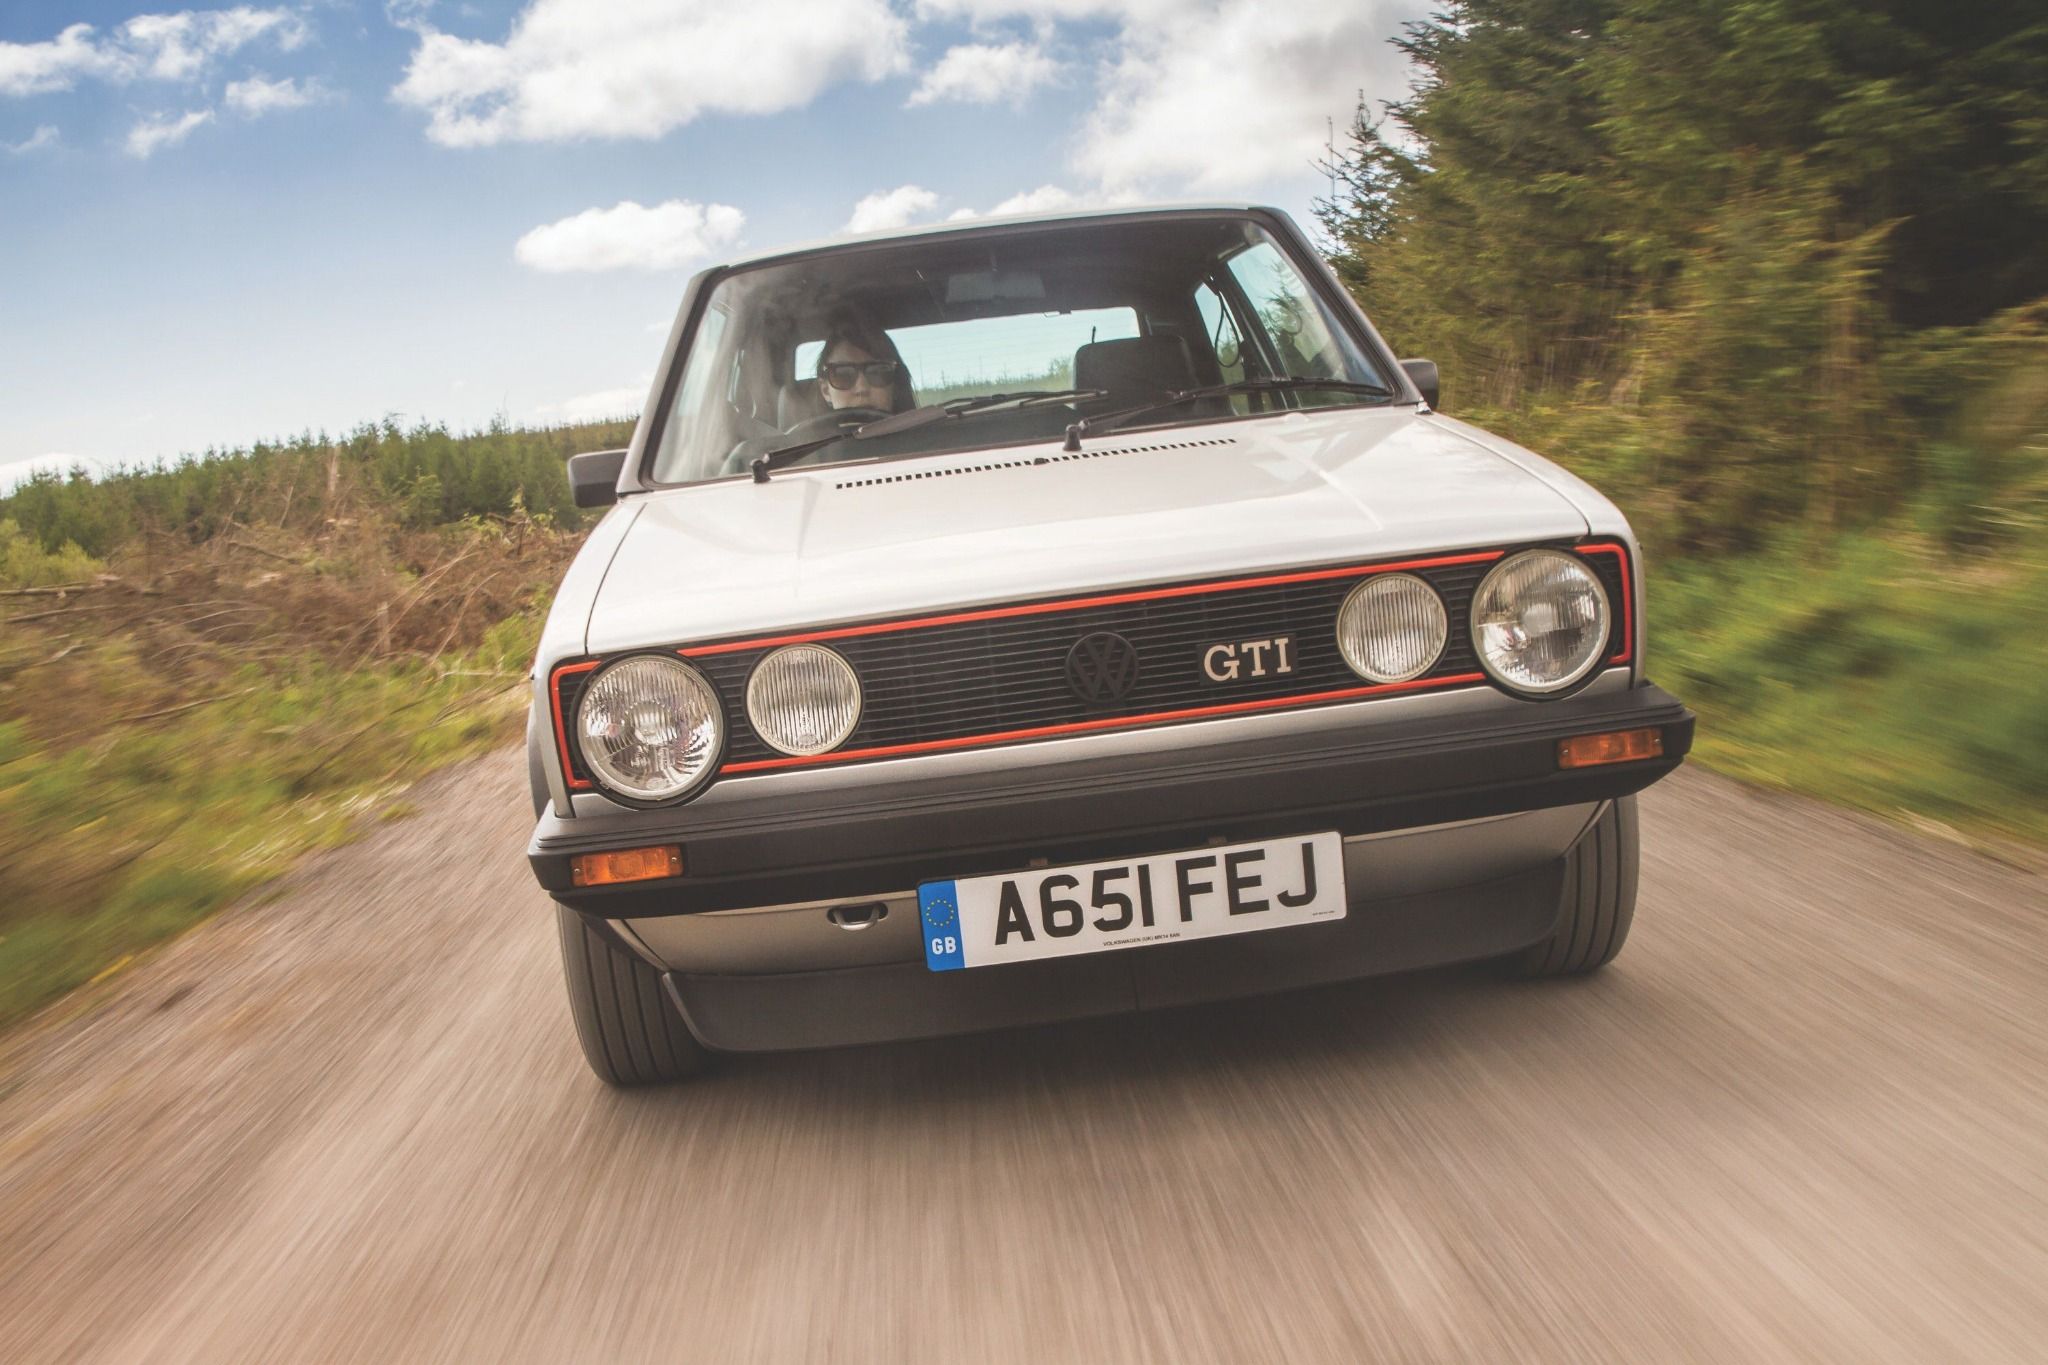 Front view of an MK1 Volkswagen Golf GTI driving on a road